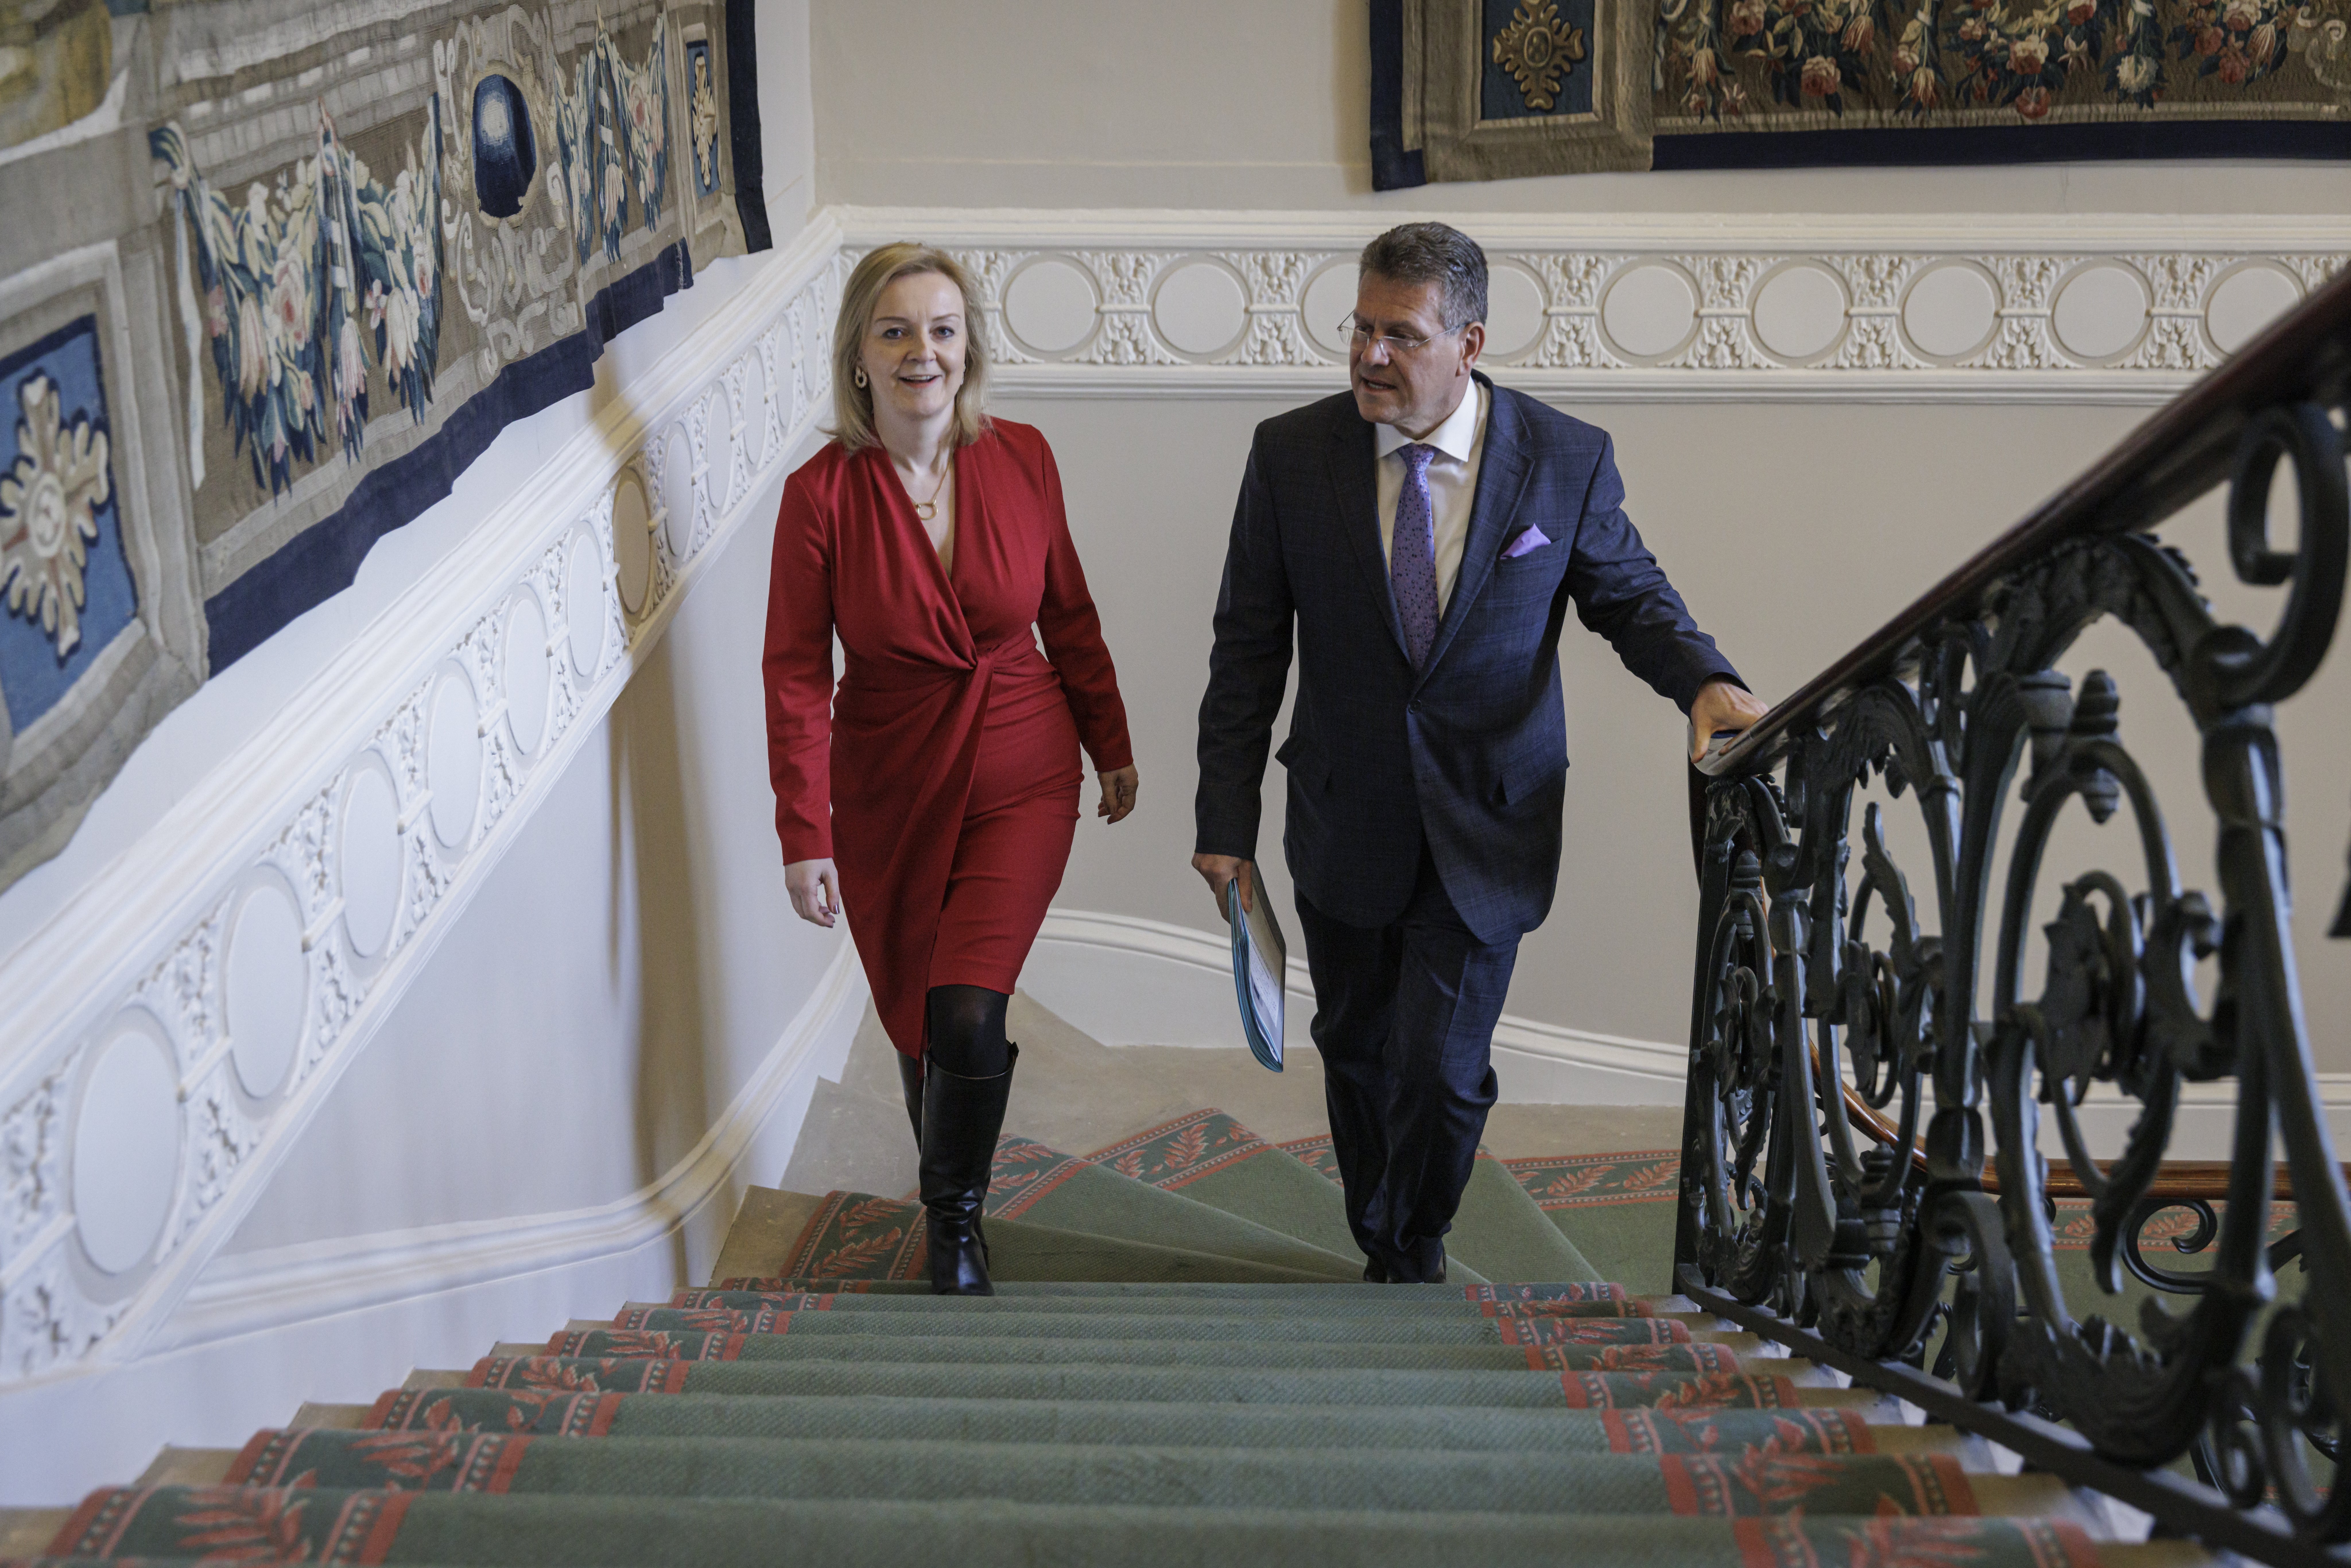 Foreign Secretary Liz Truss meeting European Commission vice-president Maros Sefcovic for talks in central London on the Northern Ireland Protocol on Friday (Rob Pinney/PA)